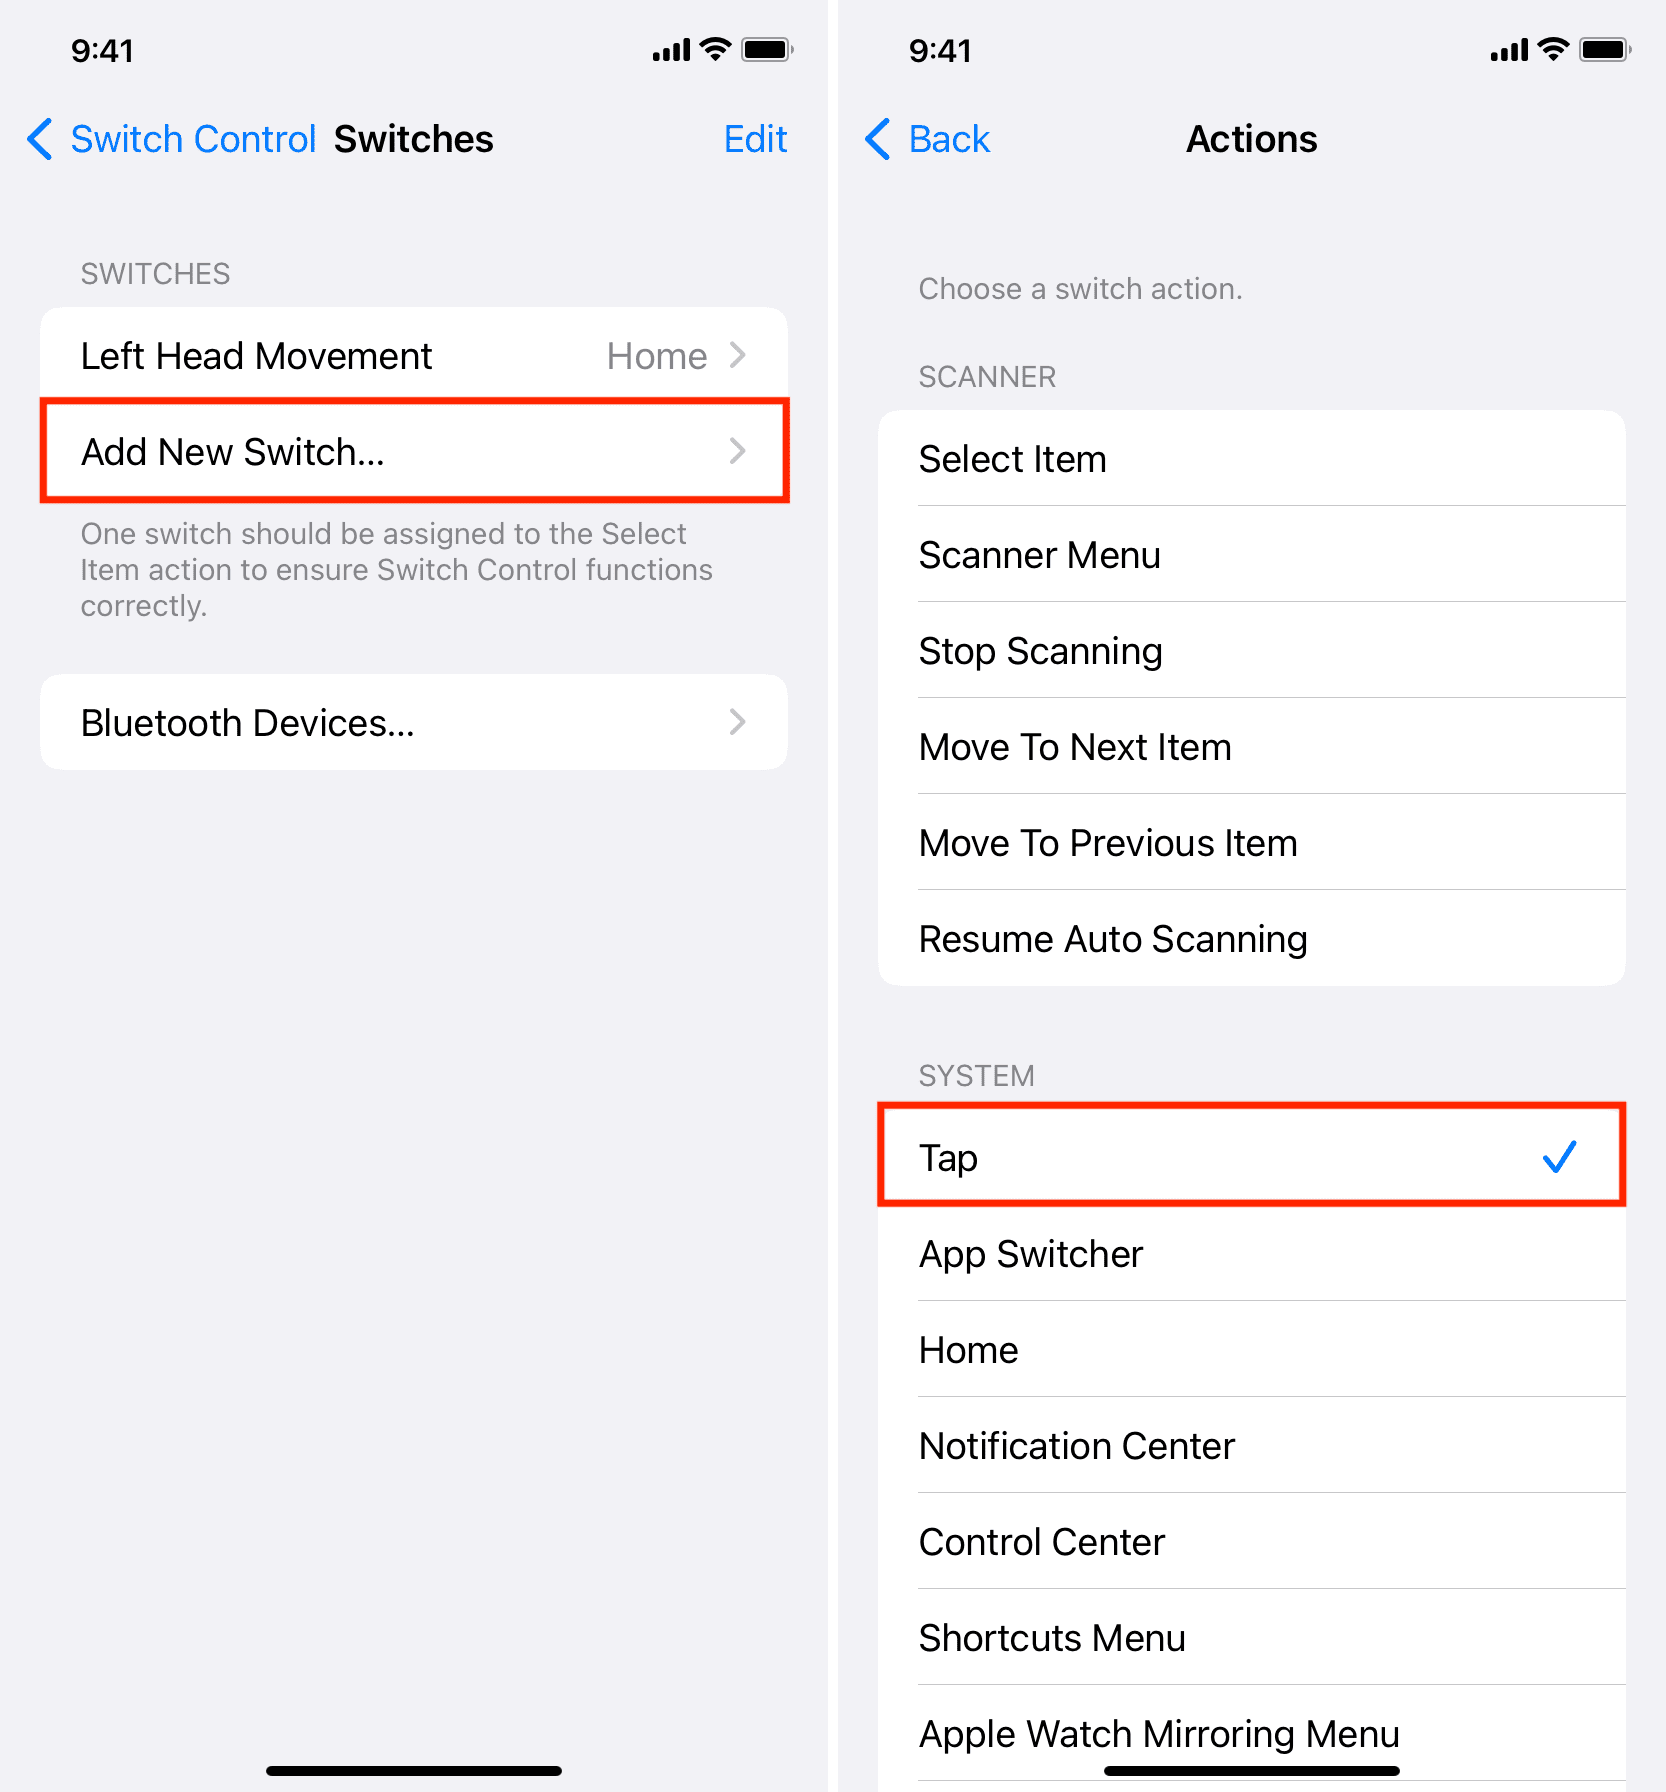 Set right head movement to make a tap in iPhone accessibility switch control settings